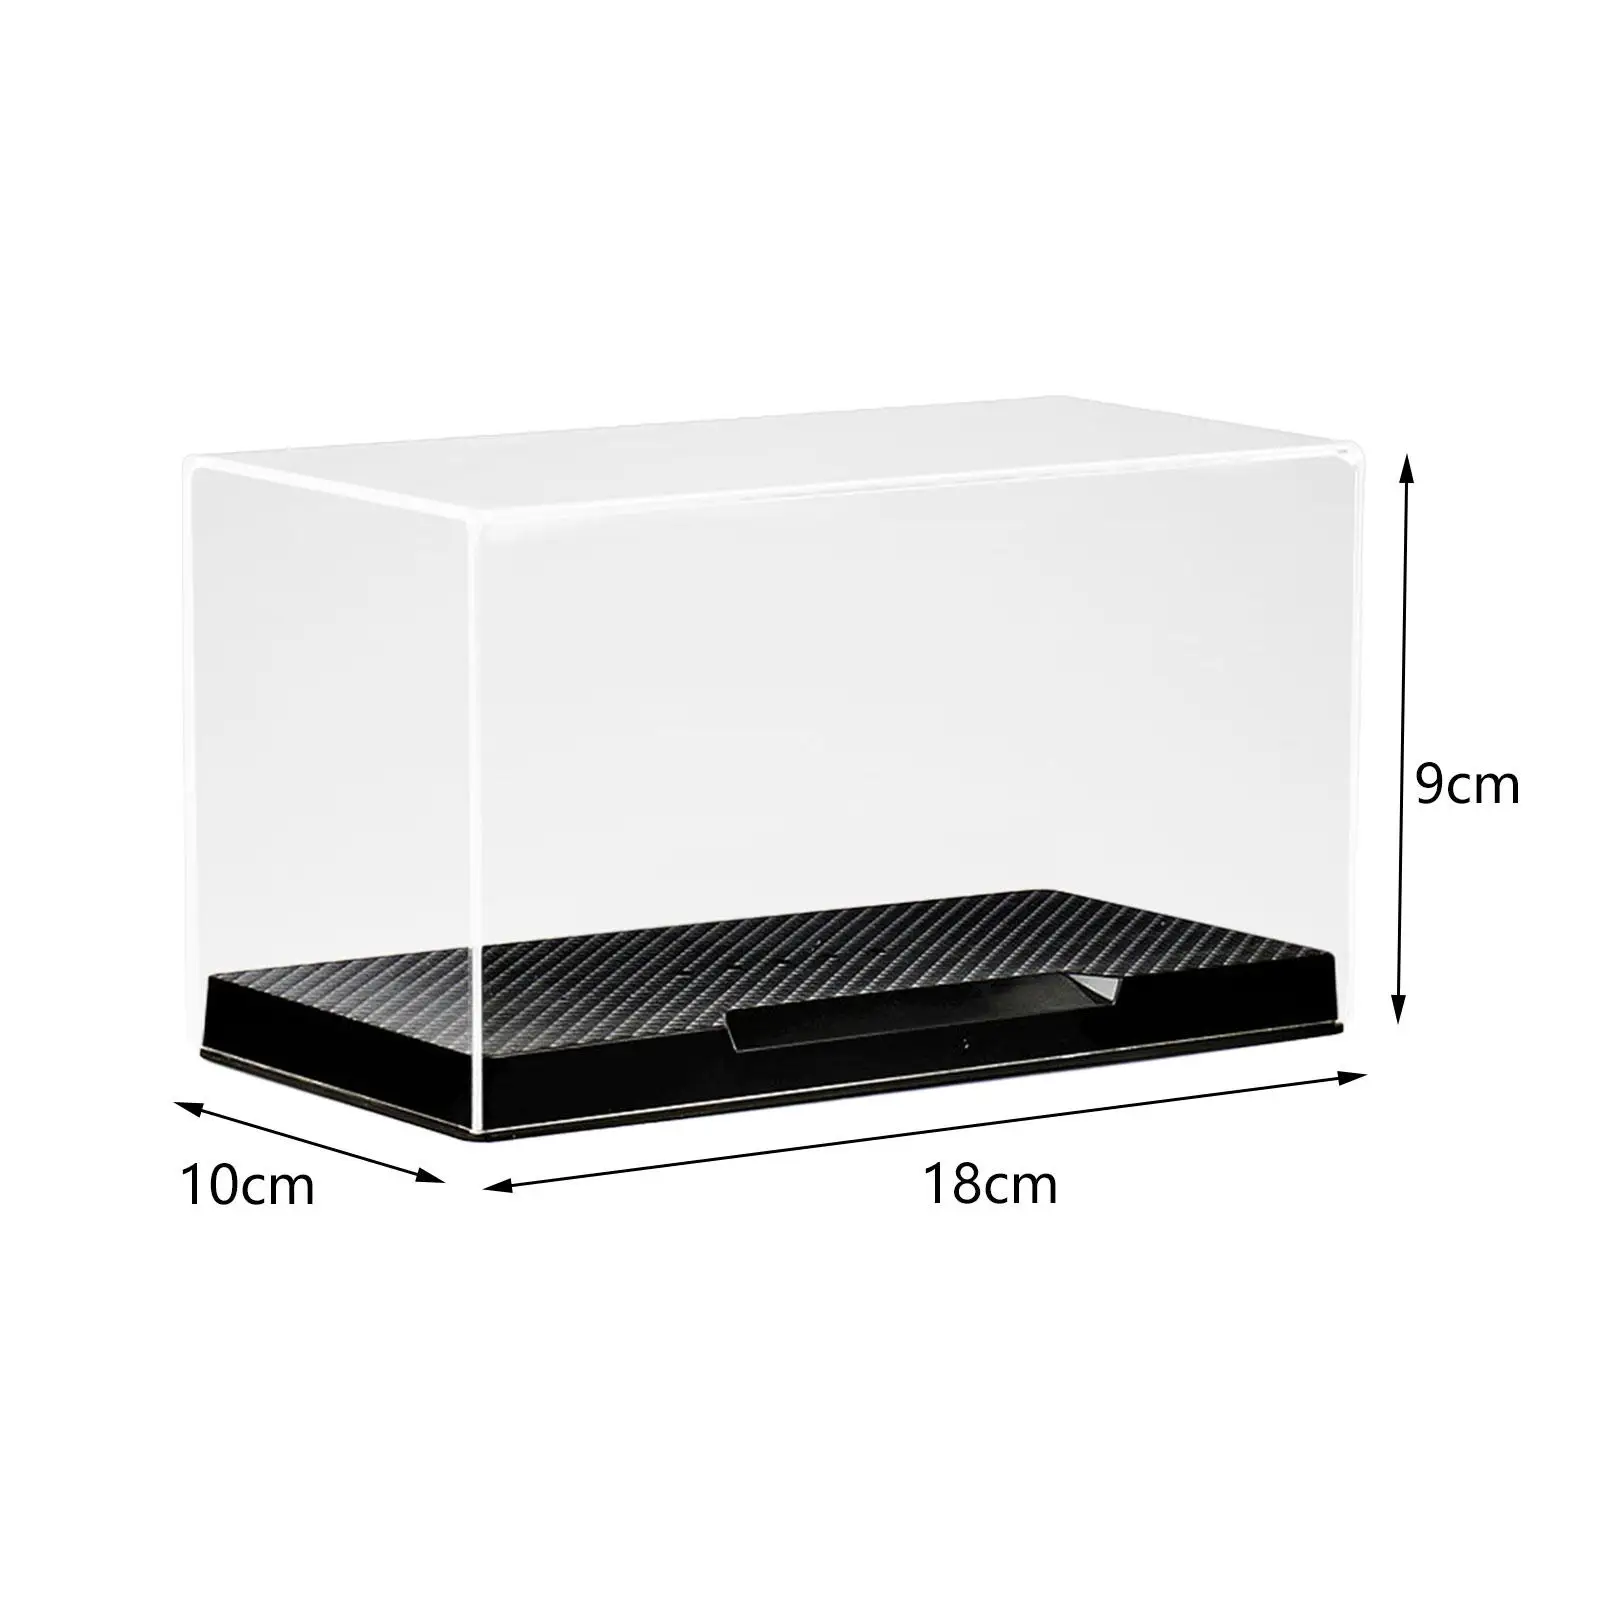 Acrylic Clear Display Case Durable Decorative Display Case Car Model Display Box for Miniature Figurines Model Cars Collectibles